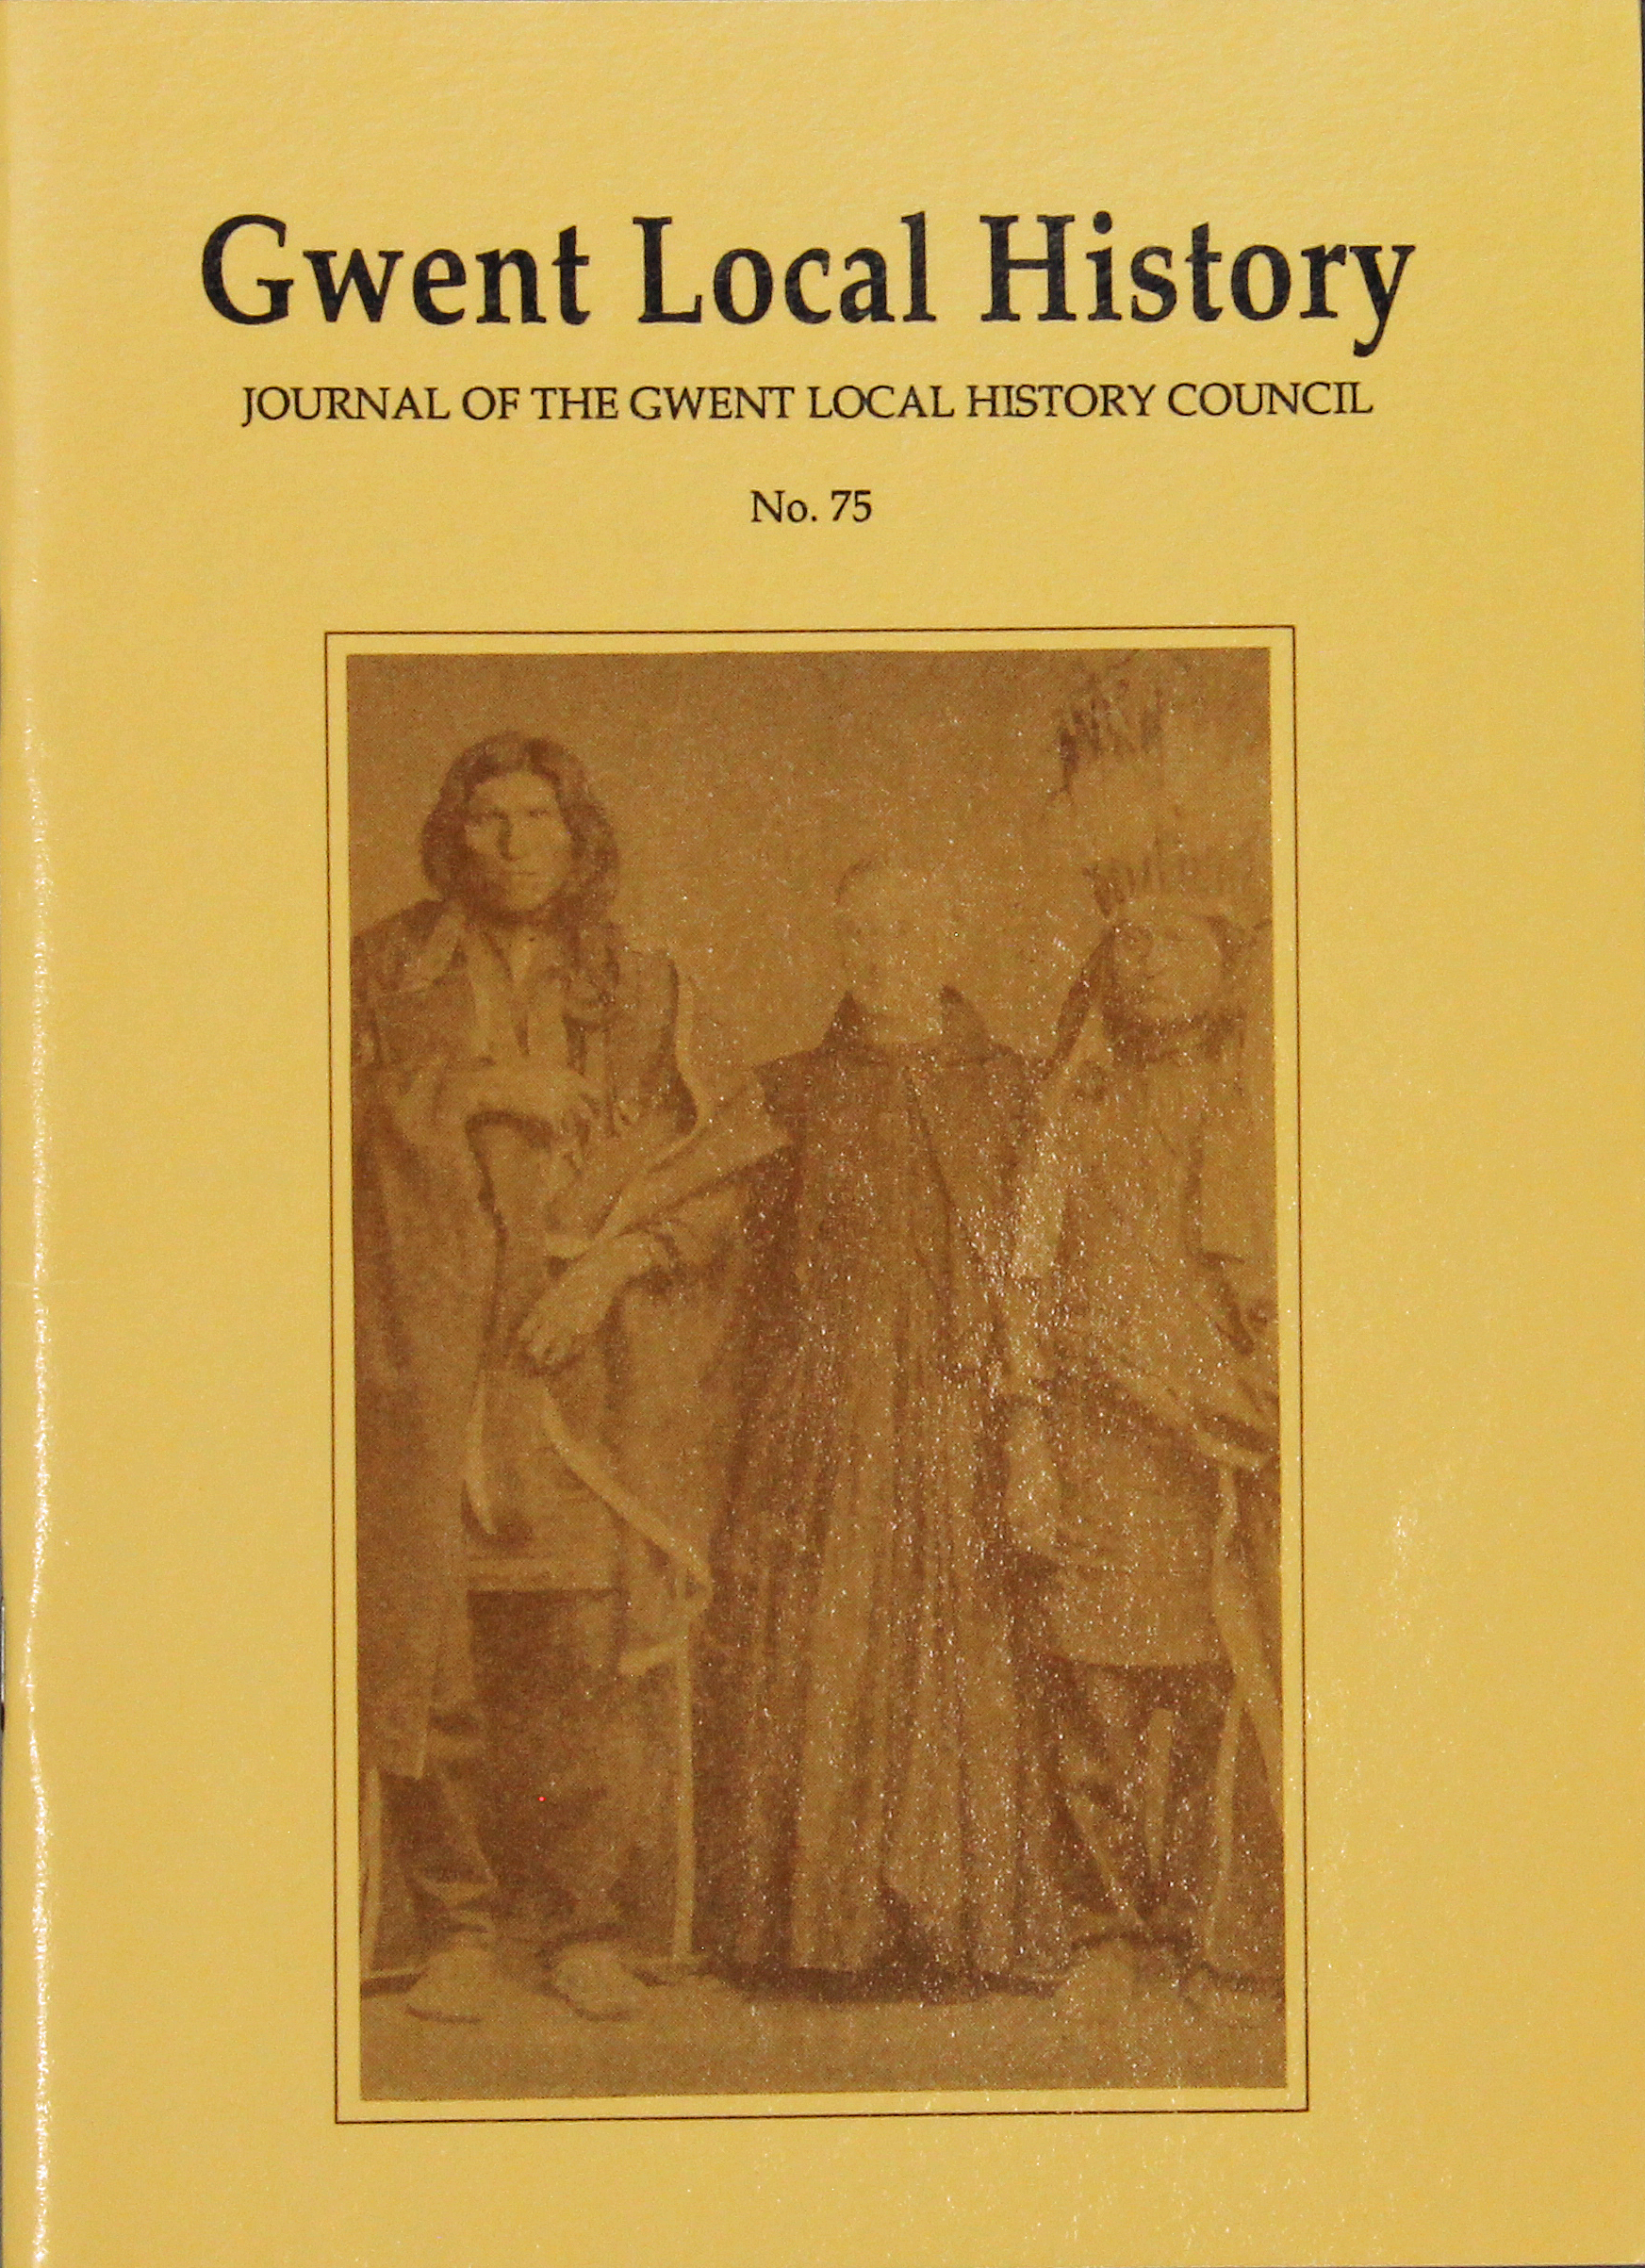 Gwent Local History: Journal of the Gwent Local History Council No.75, Spring 1994, £2.00